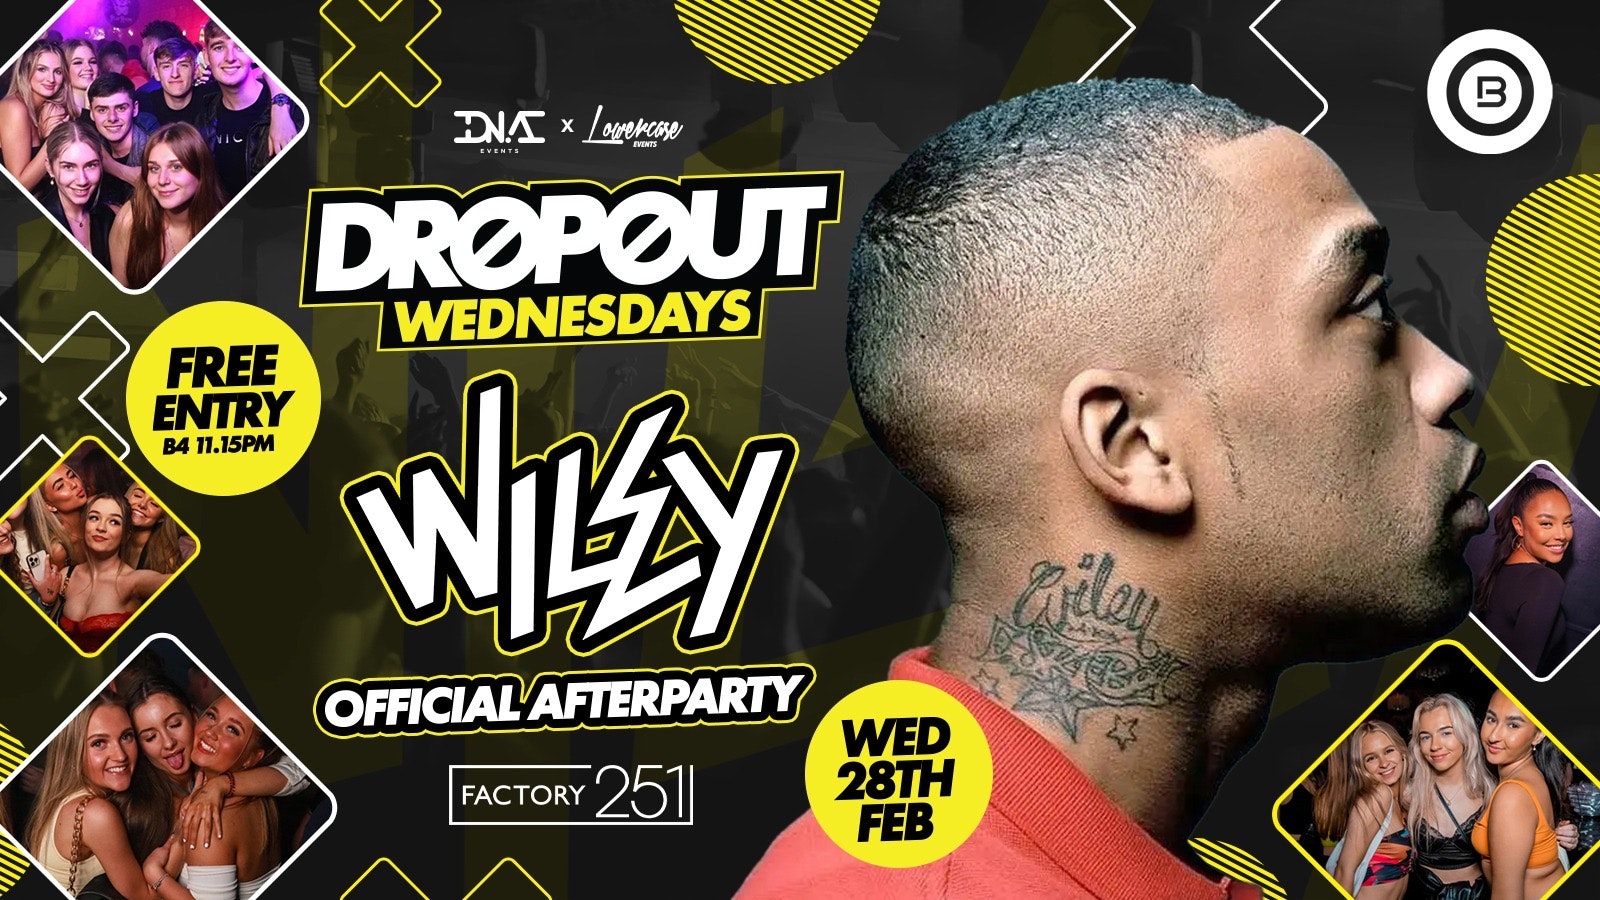 Dropout Wednesdays at Factory – Wiley’s Official After Party! FREE ENTRY 🎟🍾